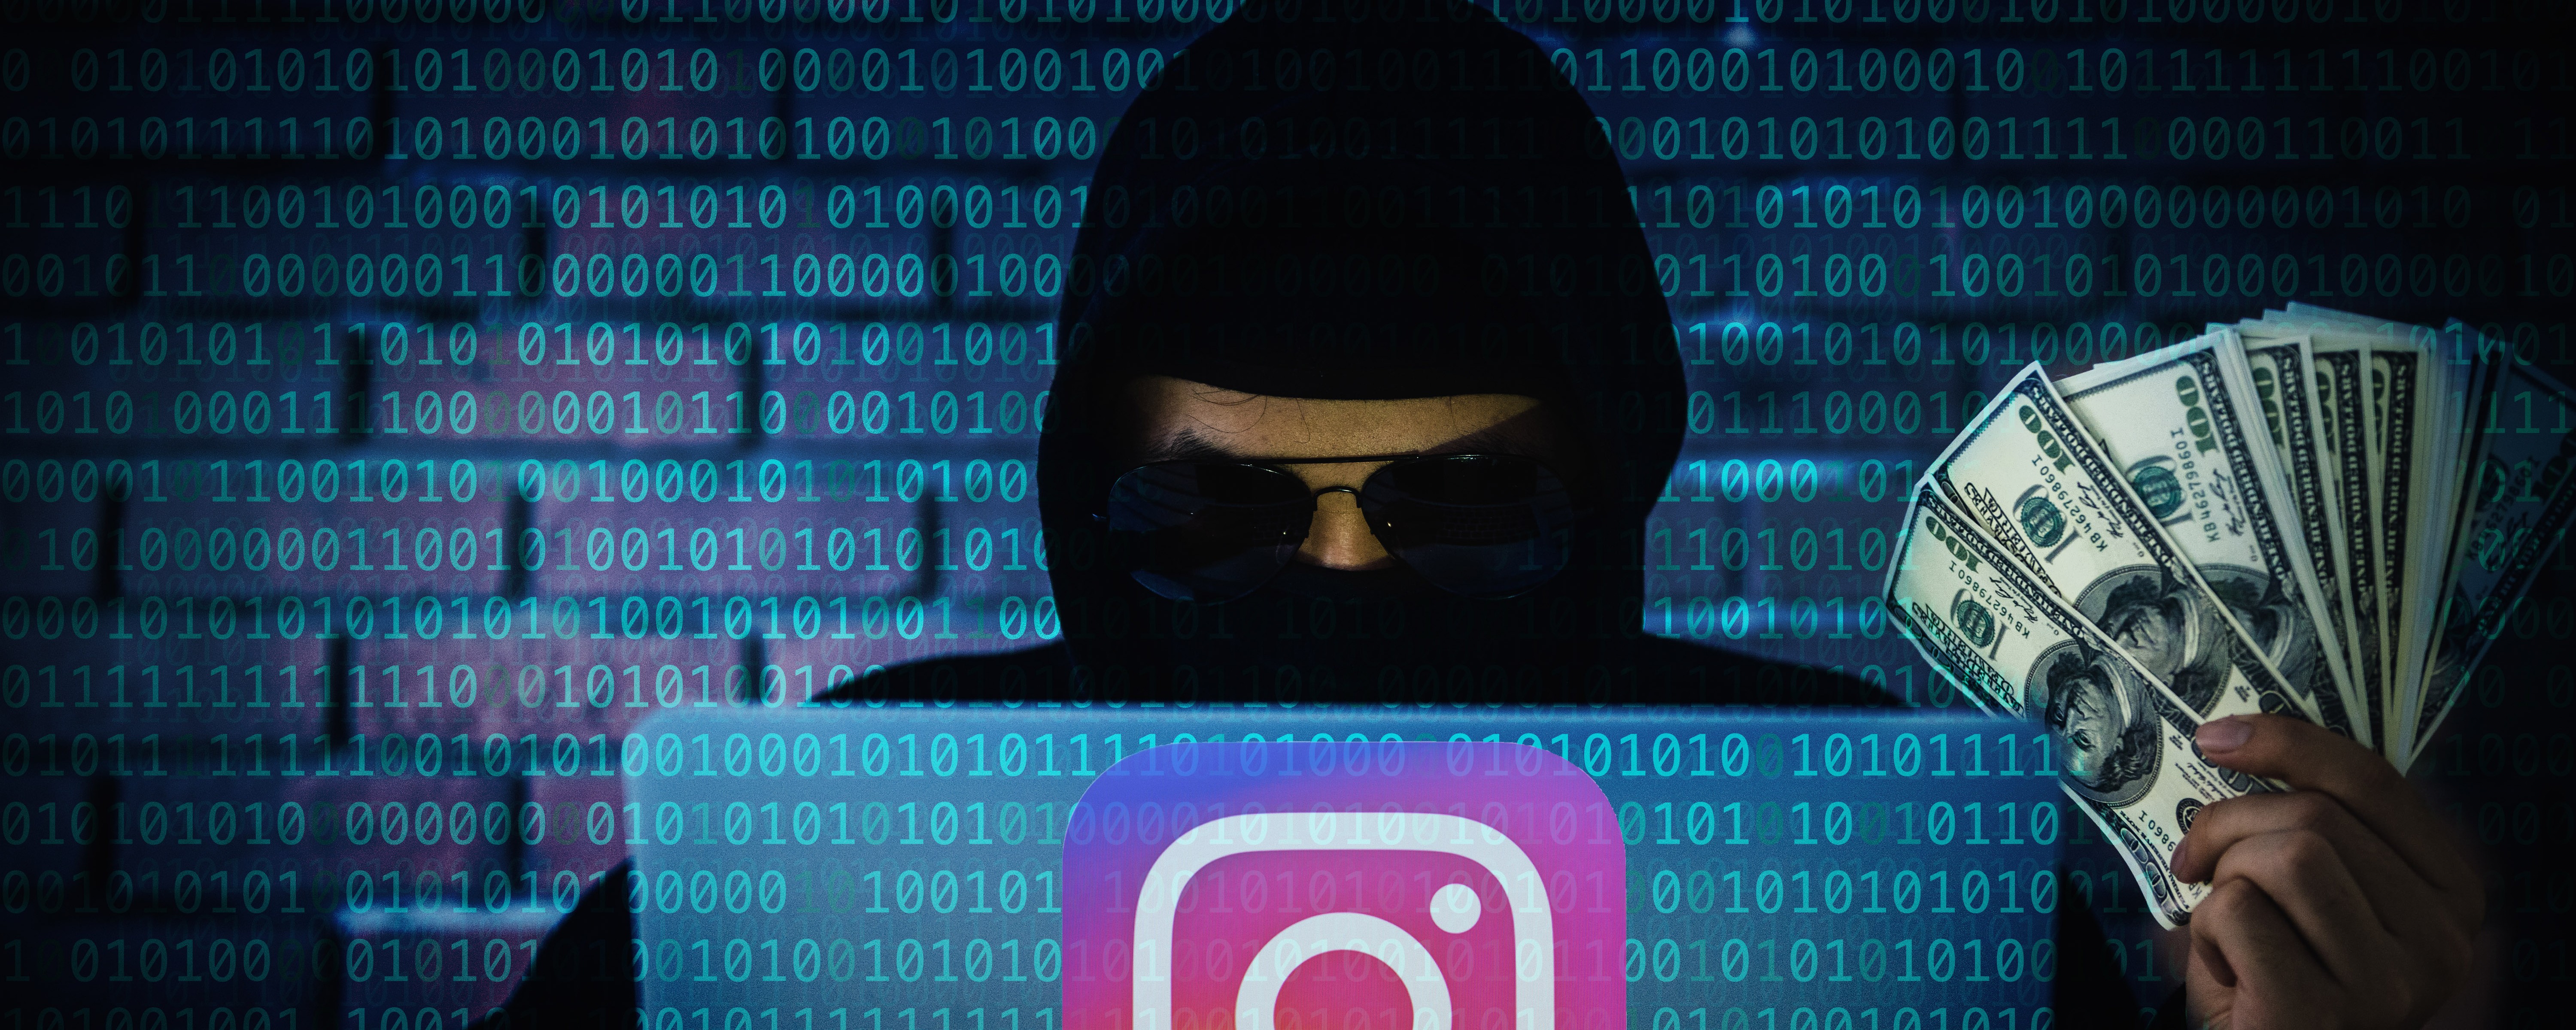 Hackers Are Holding High Profile Instagram Accounts Hostage